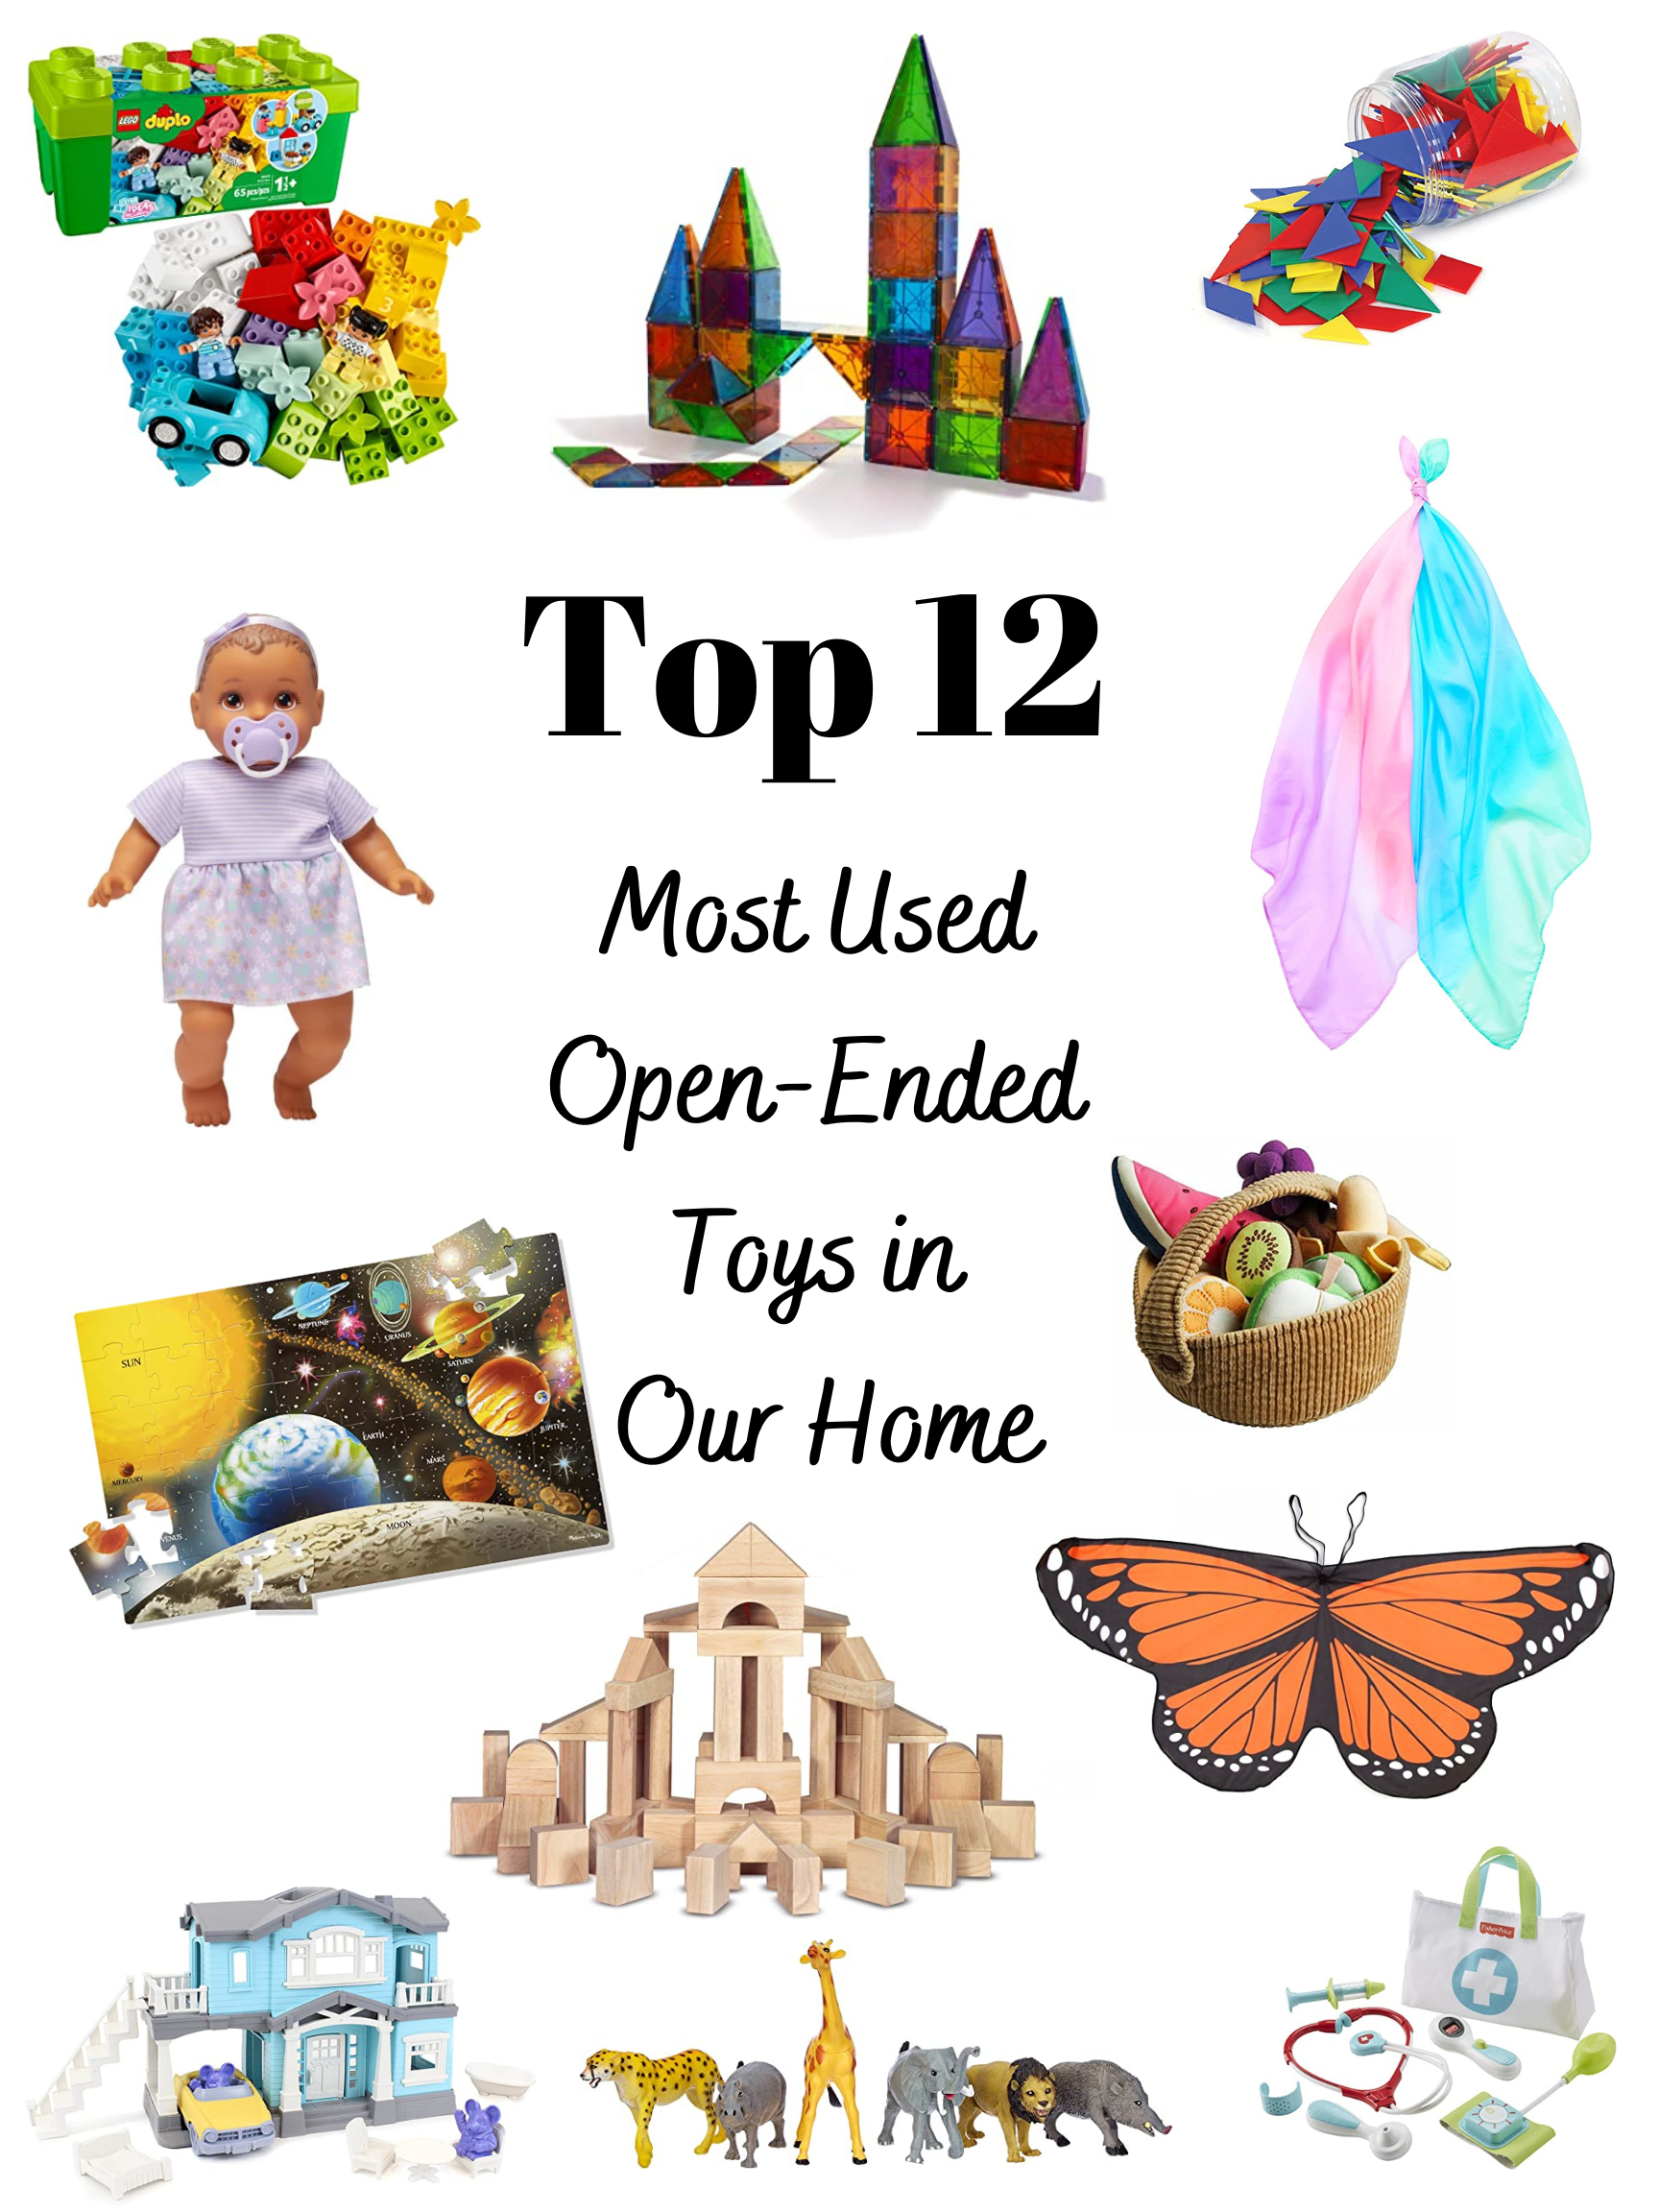 The Top 12 Most Used Open-Ended Toys in Our Home